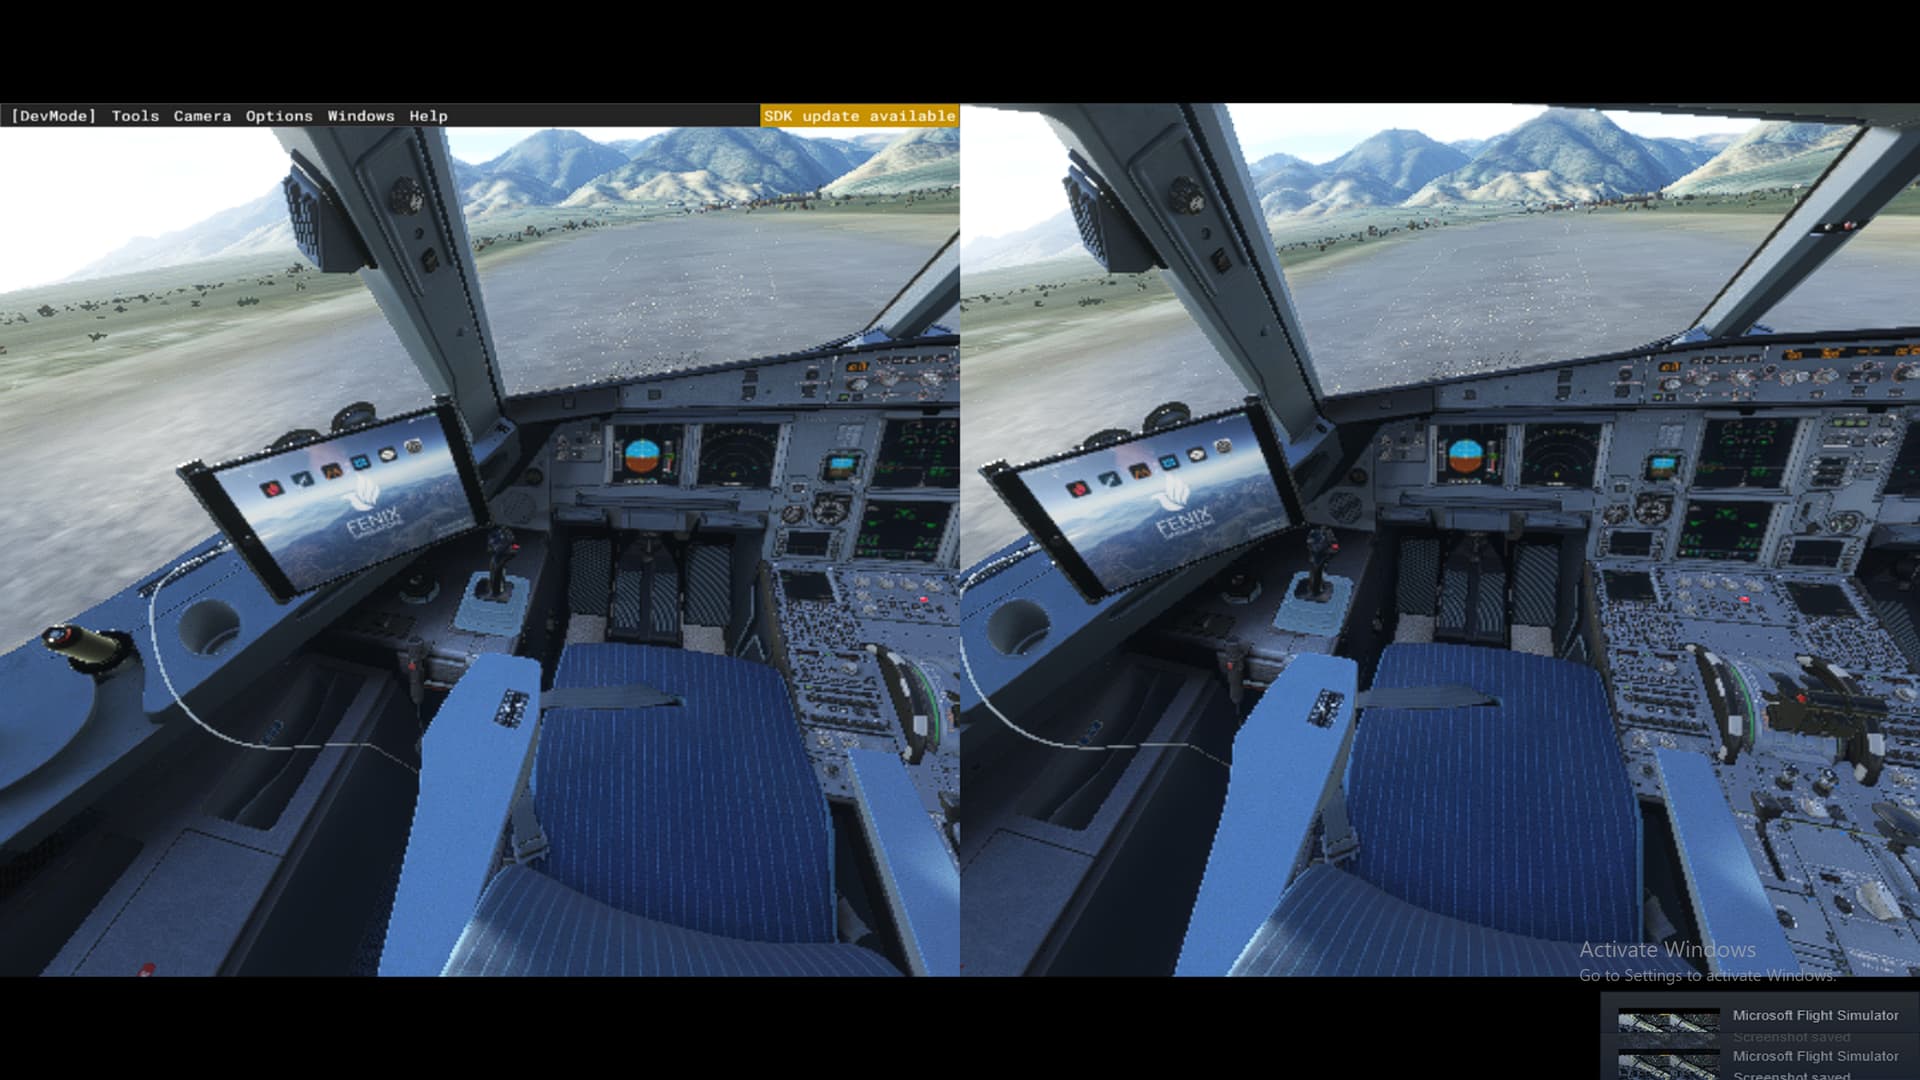 What's your learning path for MSFS VR? - Virtual Reality (VR) - Microsoft  Flight Simulator Forums